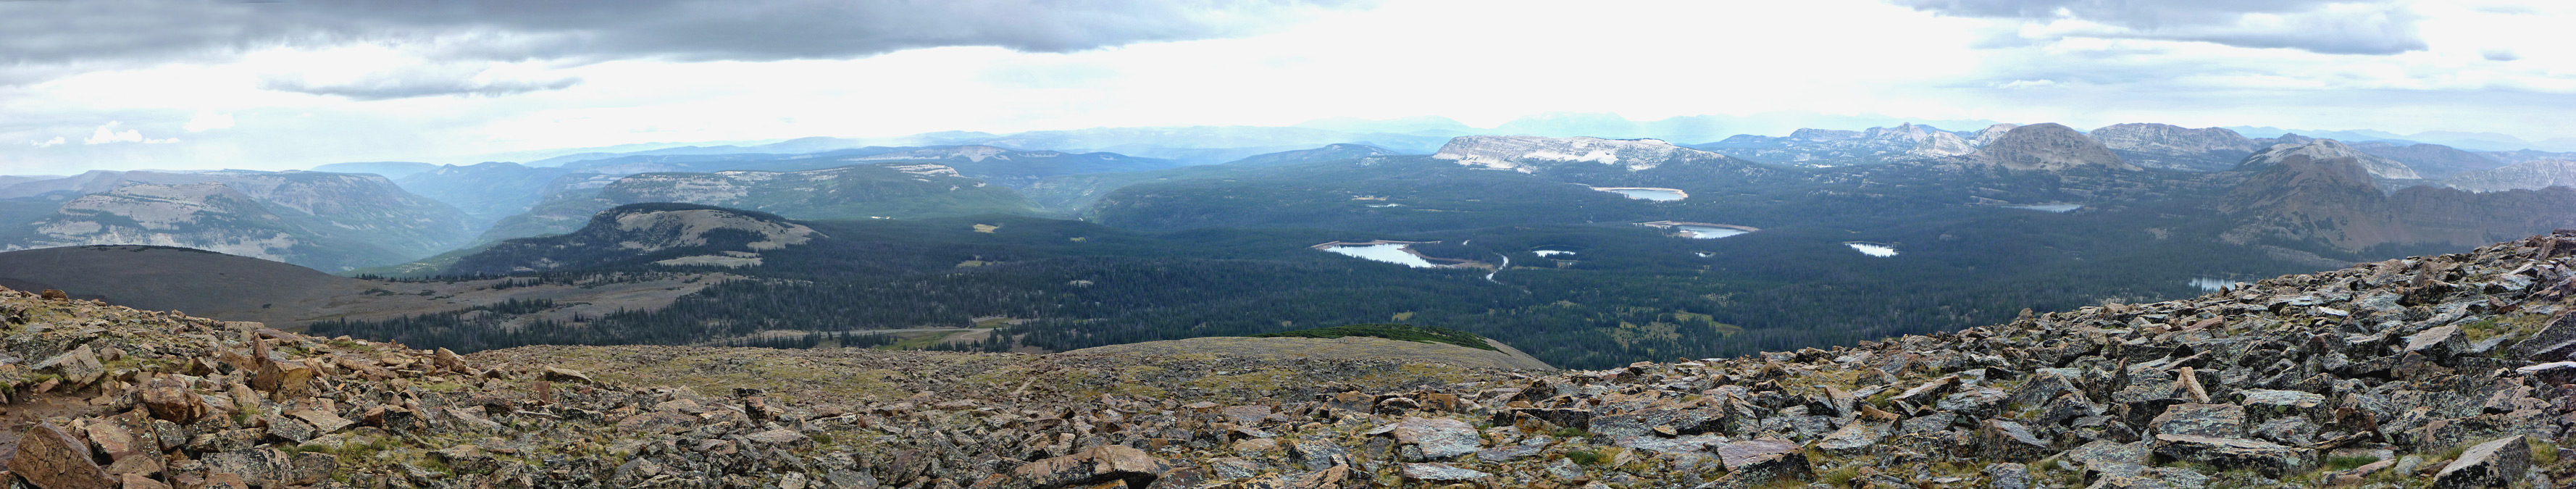 Panorama of lands to the south of Bald Mountain